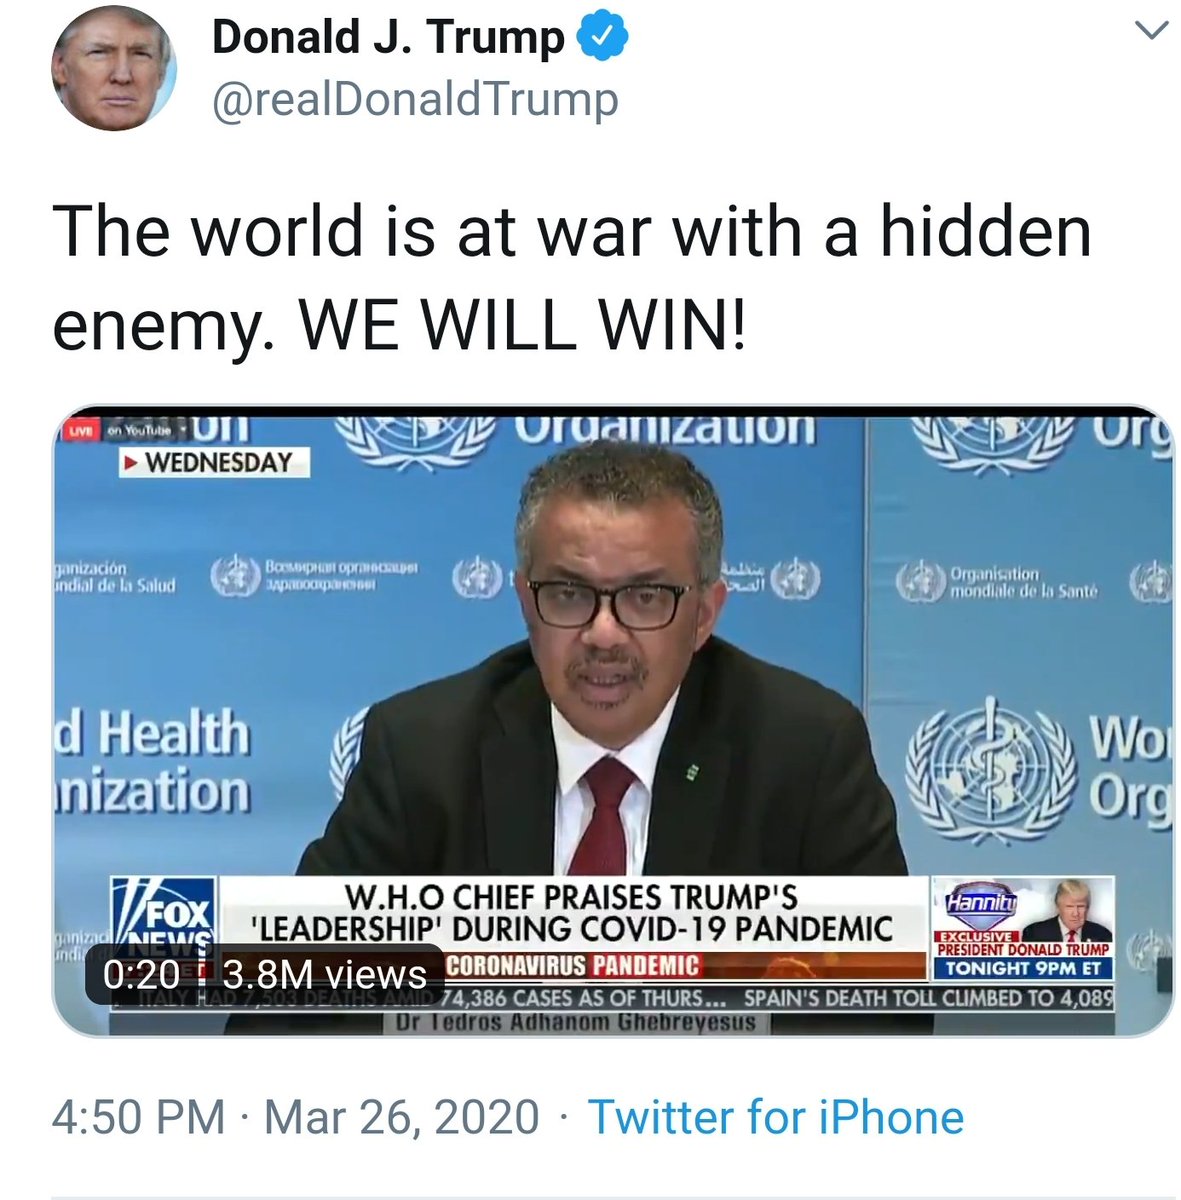 2)Meet Tedros Adhanom Head of the World Health Organization or the WHODid you wonder why  @POTUS used Tedros Adhanom's image for this Tweet?I think I might have an idea, check it